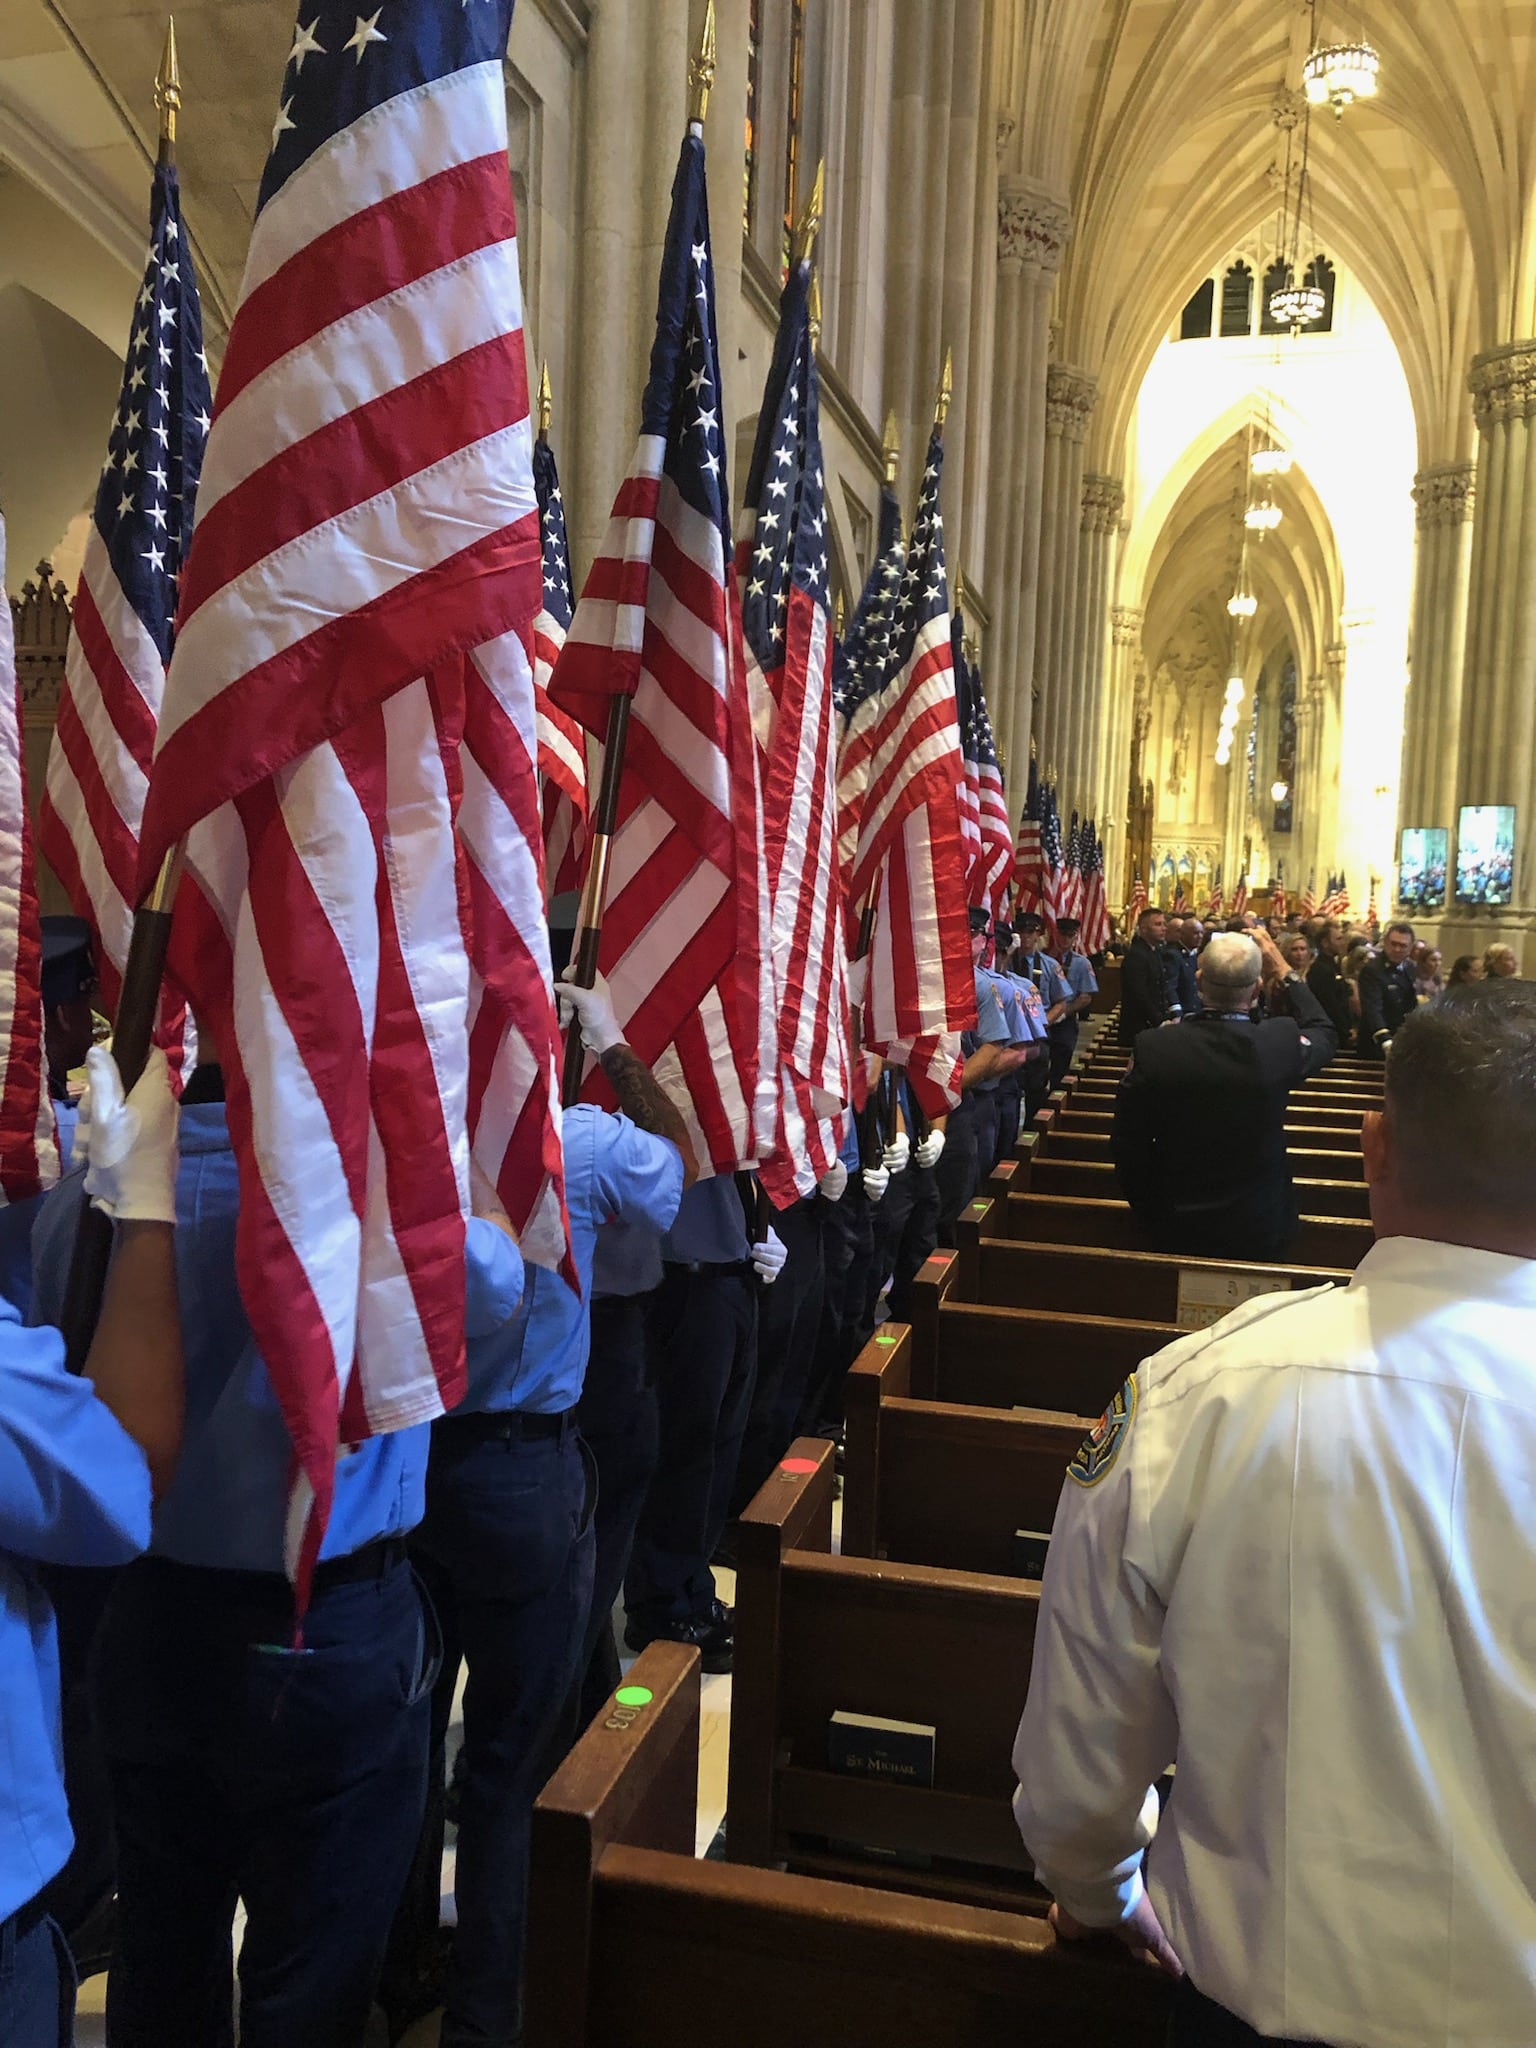 343 FDNY recruits stand with American flags inside St. Patrick’s Cathedral